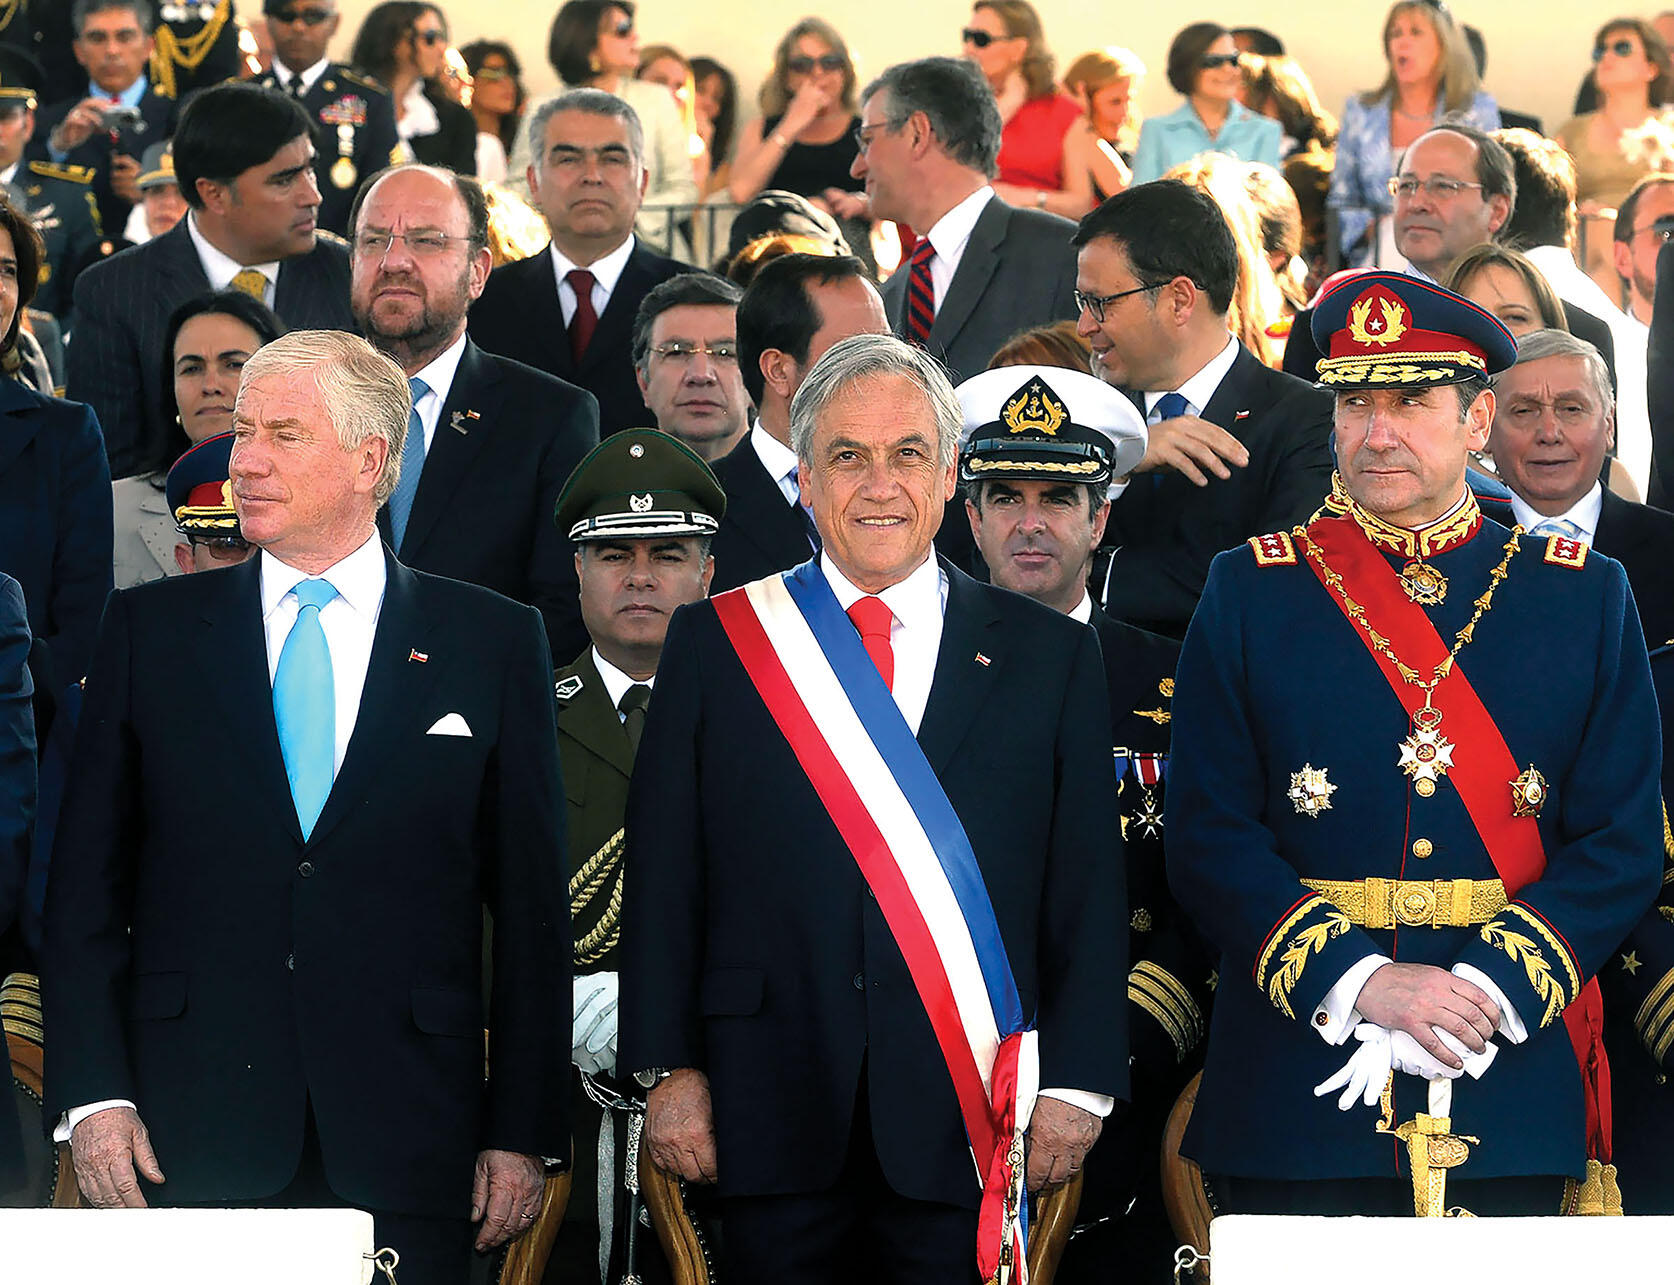 President Sebastián Piñera surrounded by military officers at a parade in 2010. (Photo courtesy of Gobierno de Chile.)